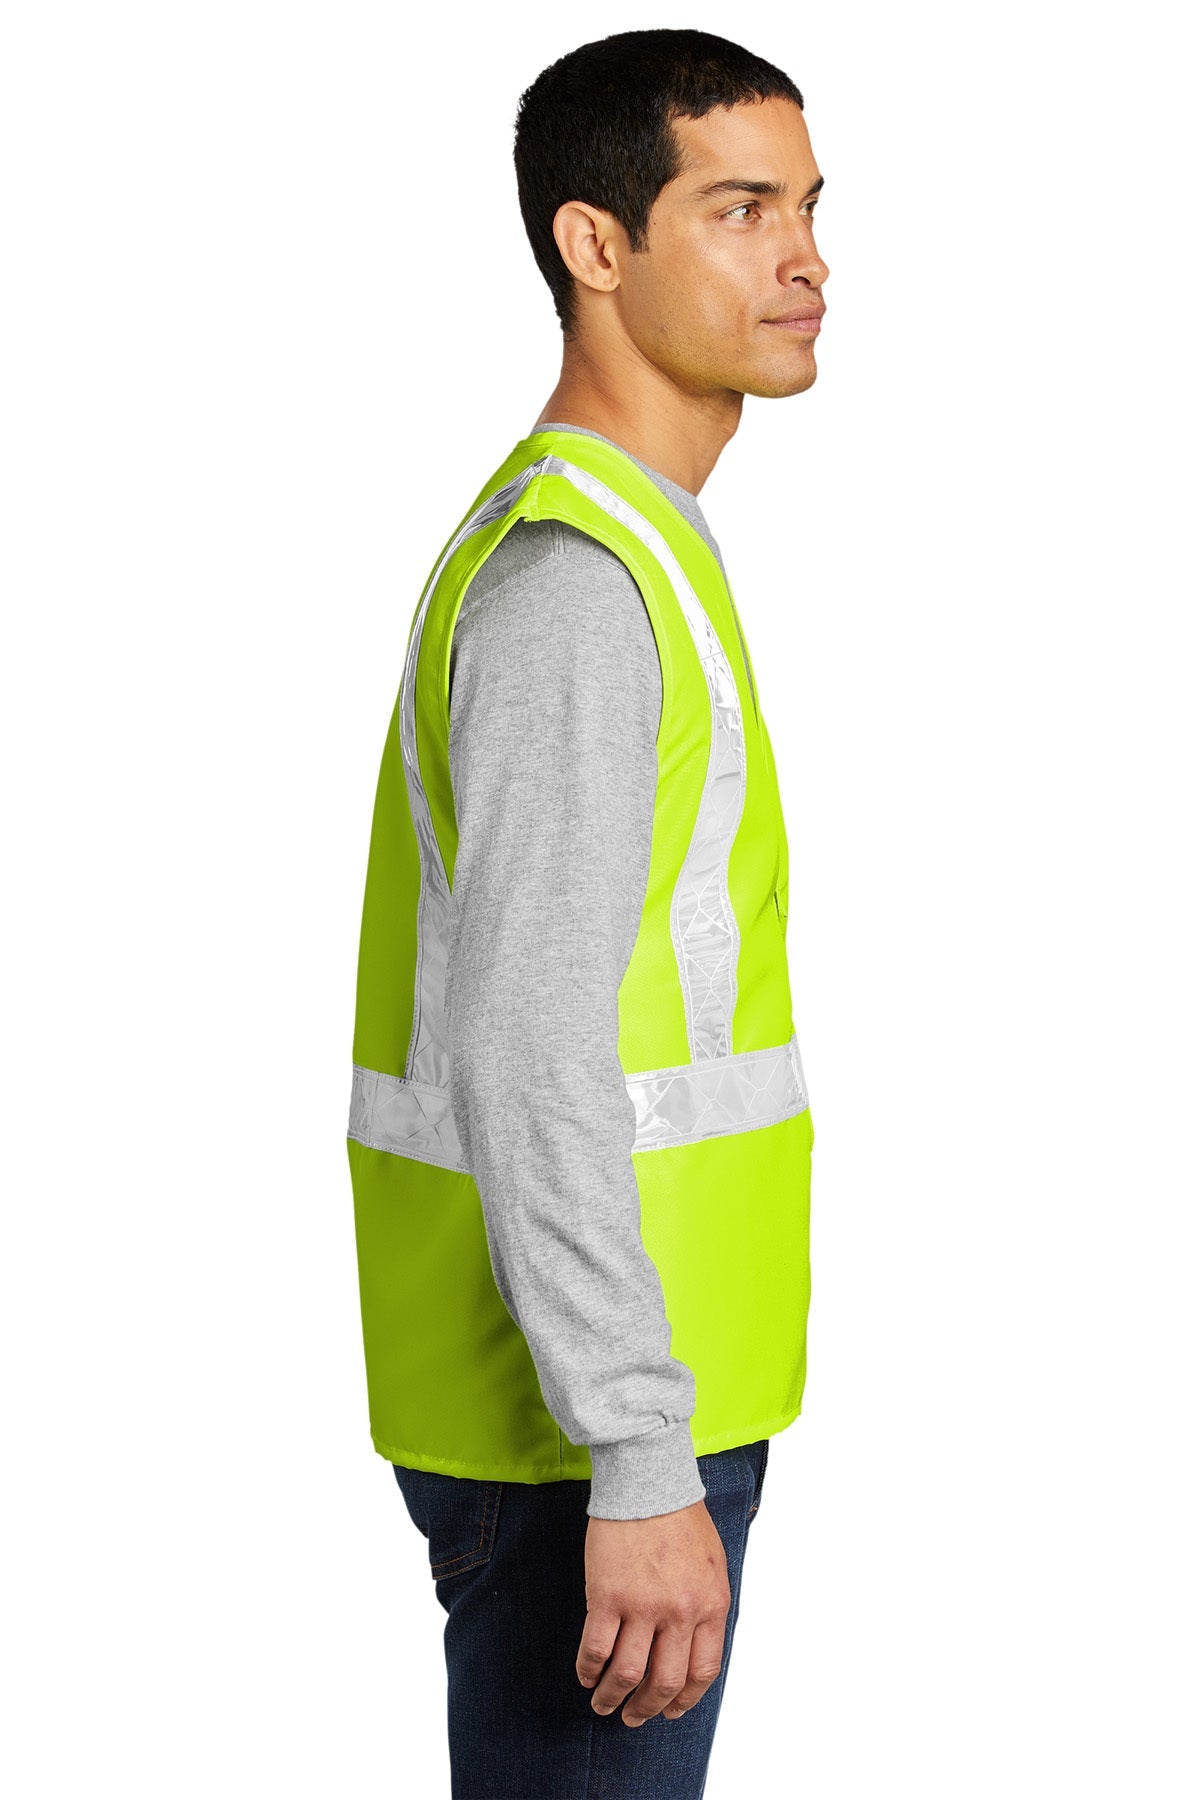 Port Authority Enhanced Visibility Branded Vests, Safety Yellow/ Reflective